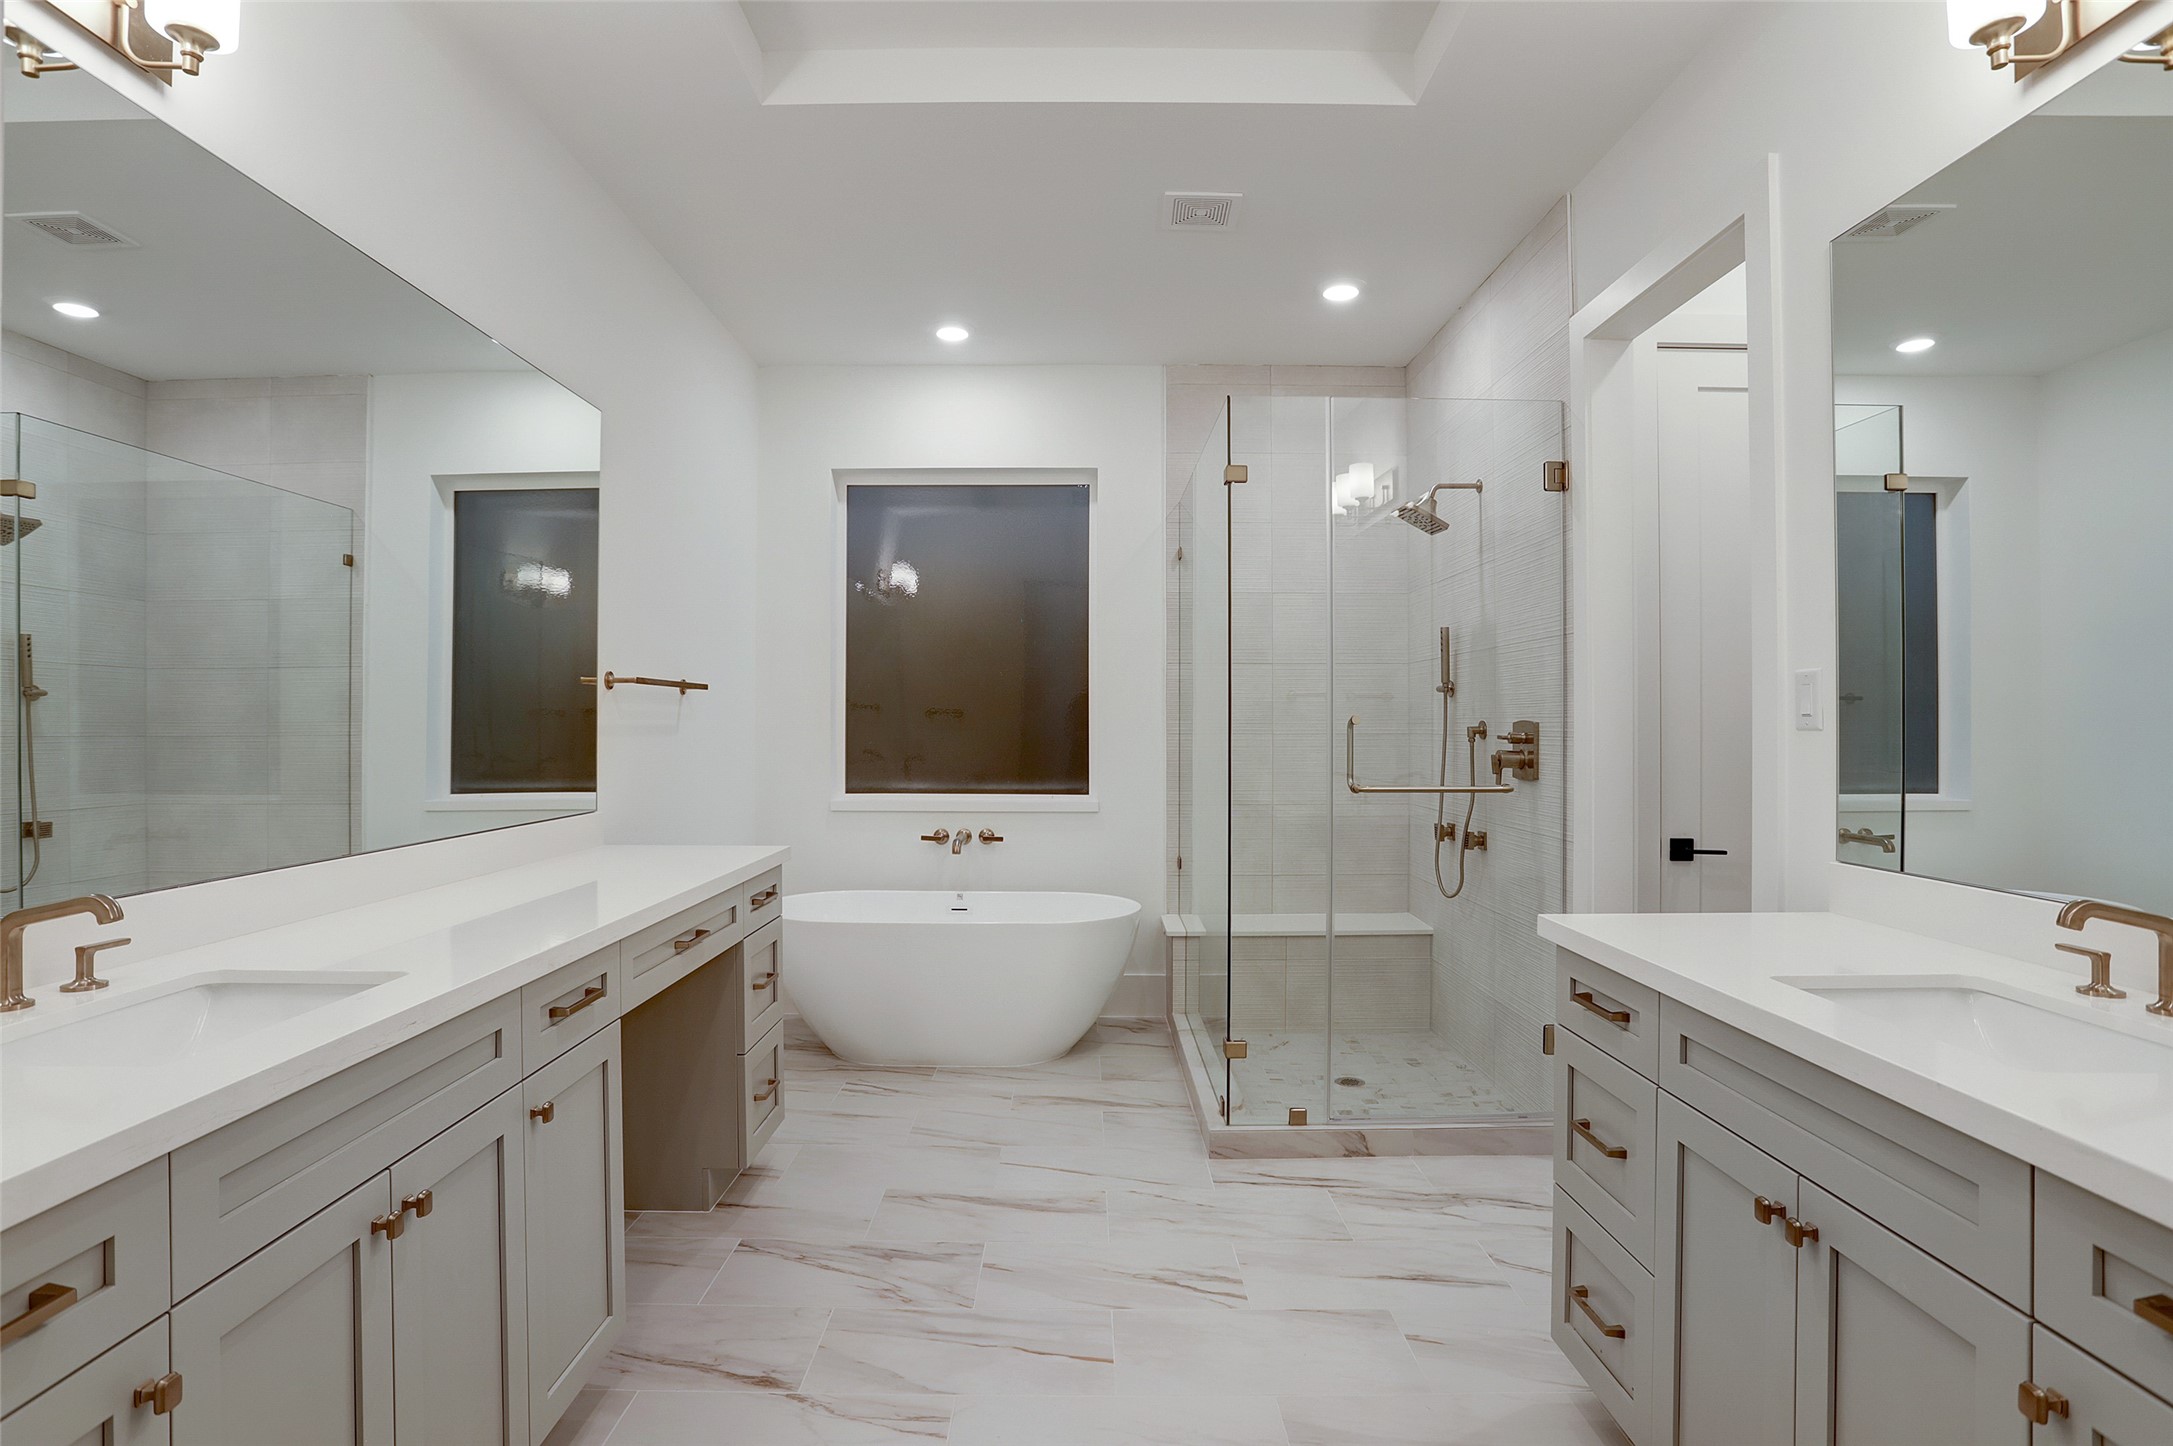 A draw dropping primary suite with his and her dedicated vanity areas, seamless glass shower and statement soaking tub.